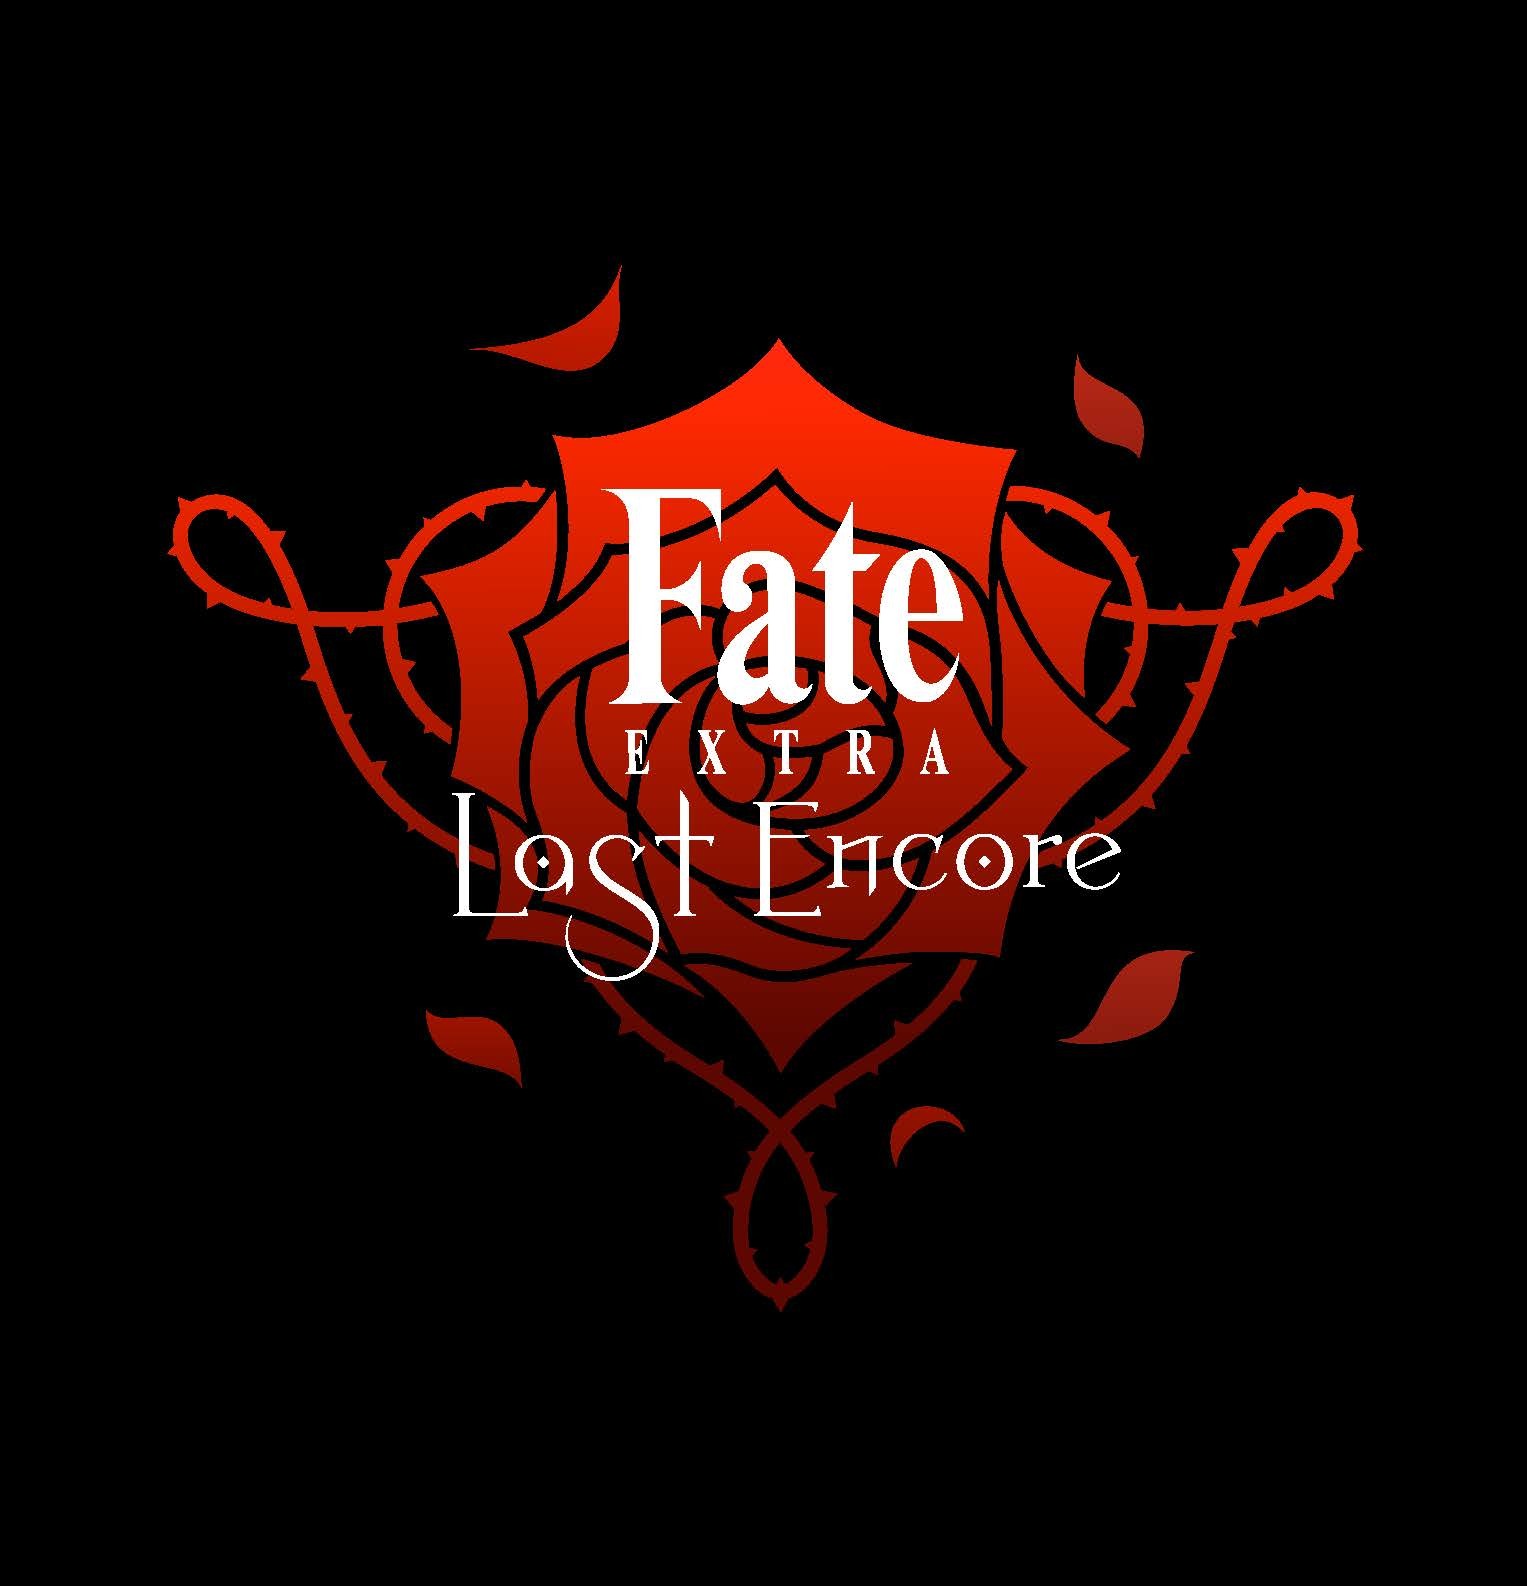 『Fate/EXTRA Last Encore』ロゴ　（c）TYPE-MOON/Marvelous, Aniplex, Notes, SHAFT